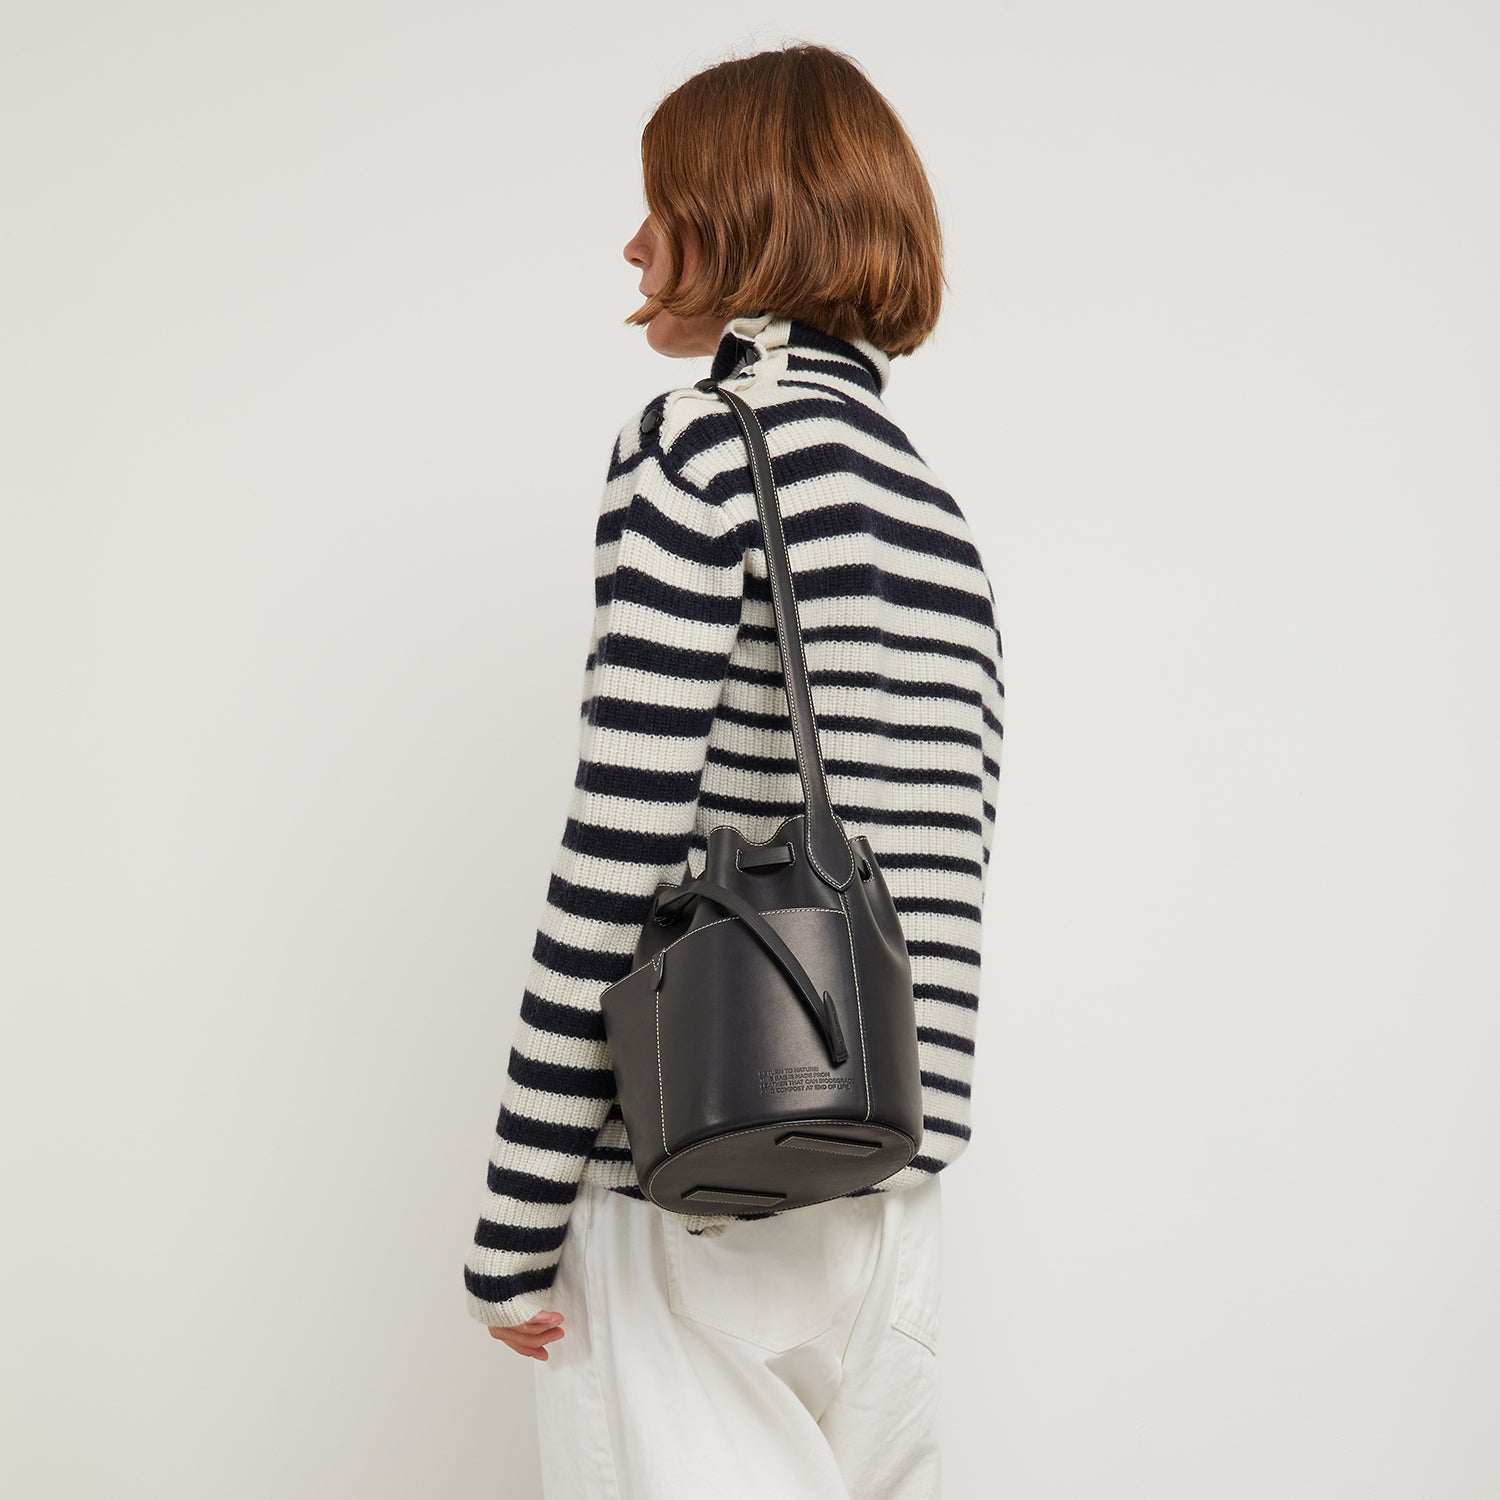 Return to Nature Small Bucket Bag -

                  
                    Compostable Leather in Black -
                  

                  Anya Hindmarch UK
